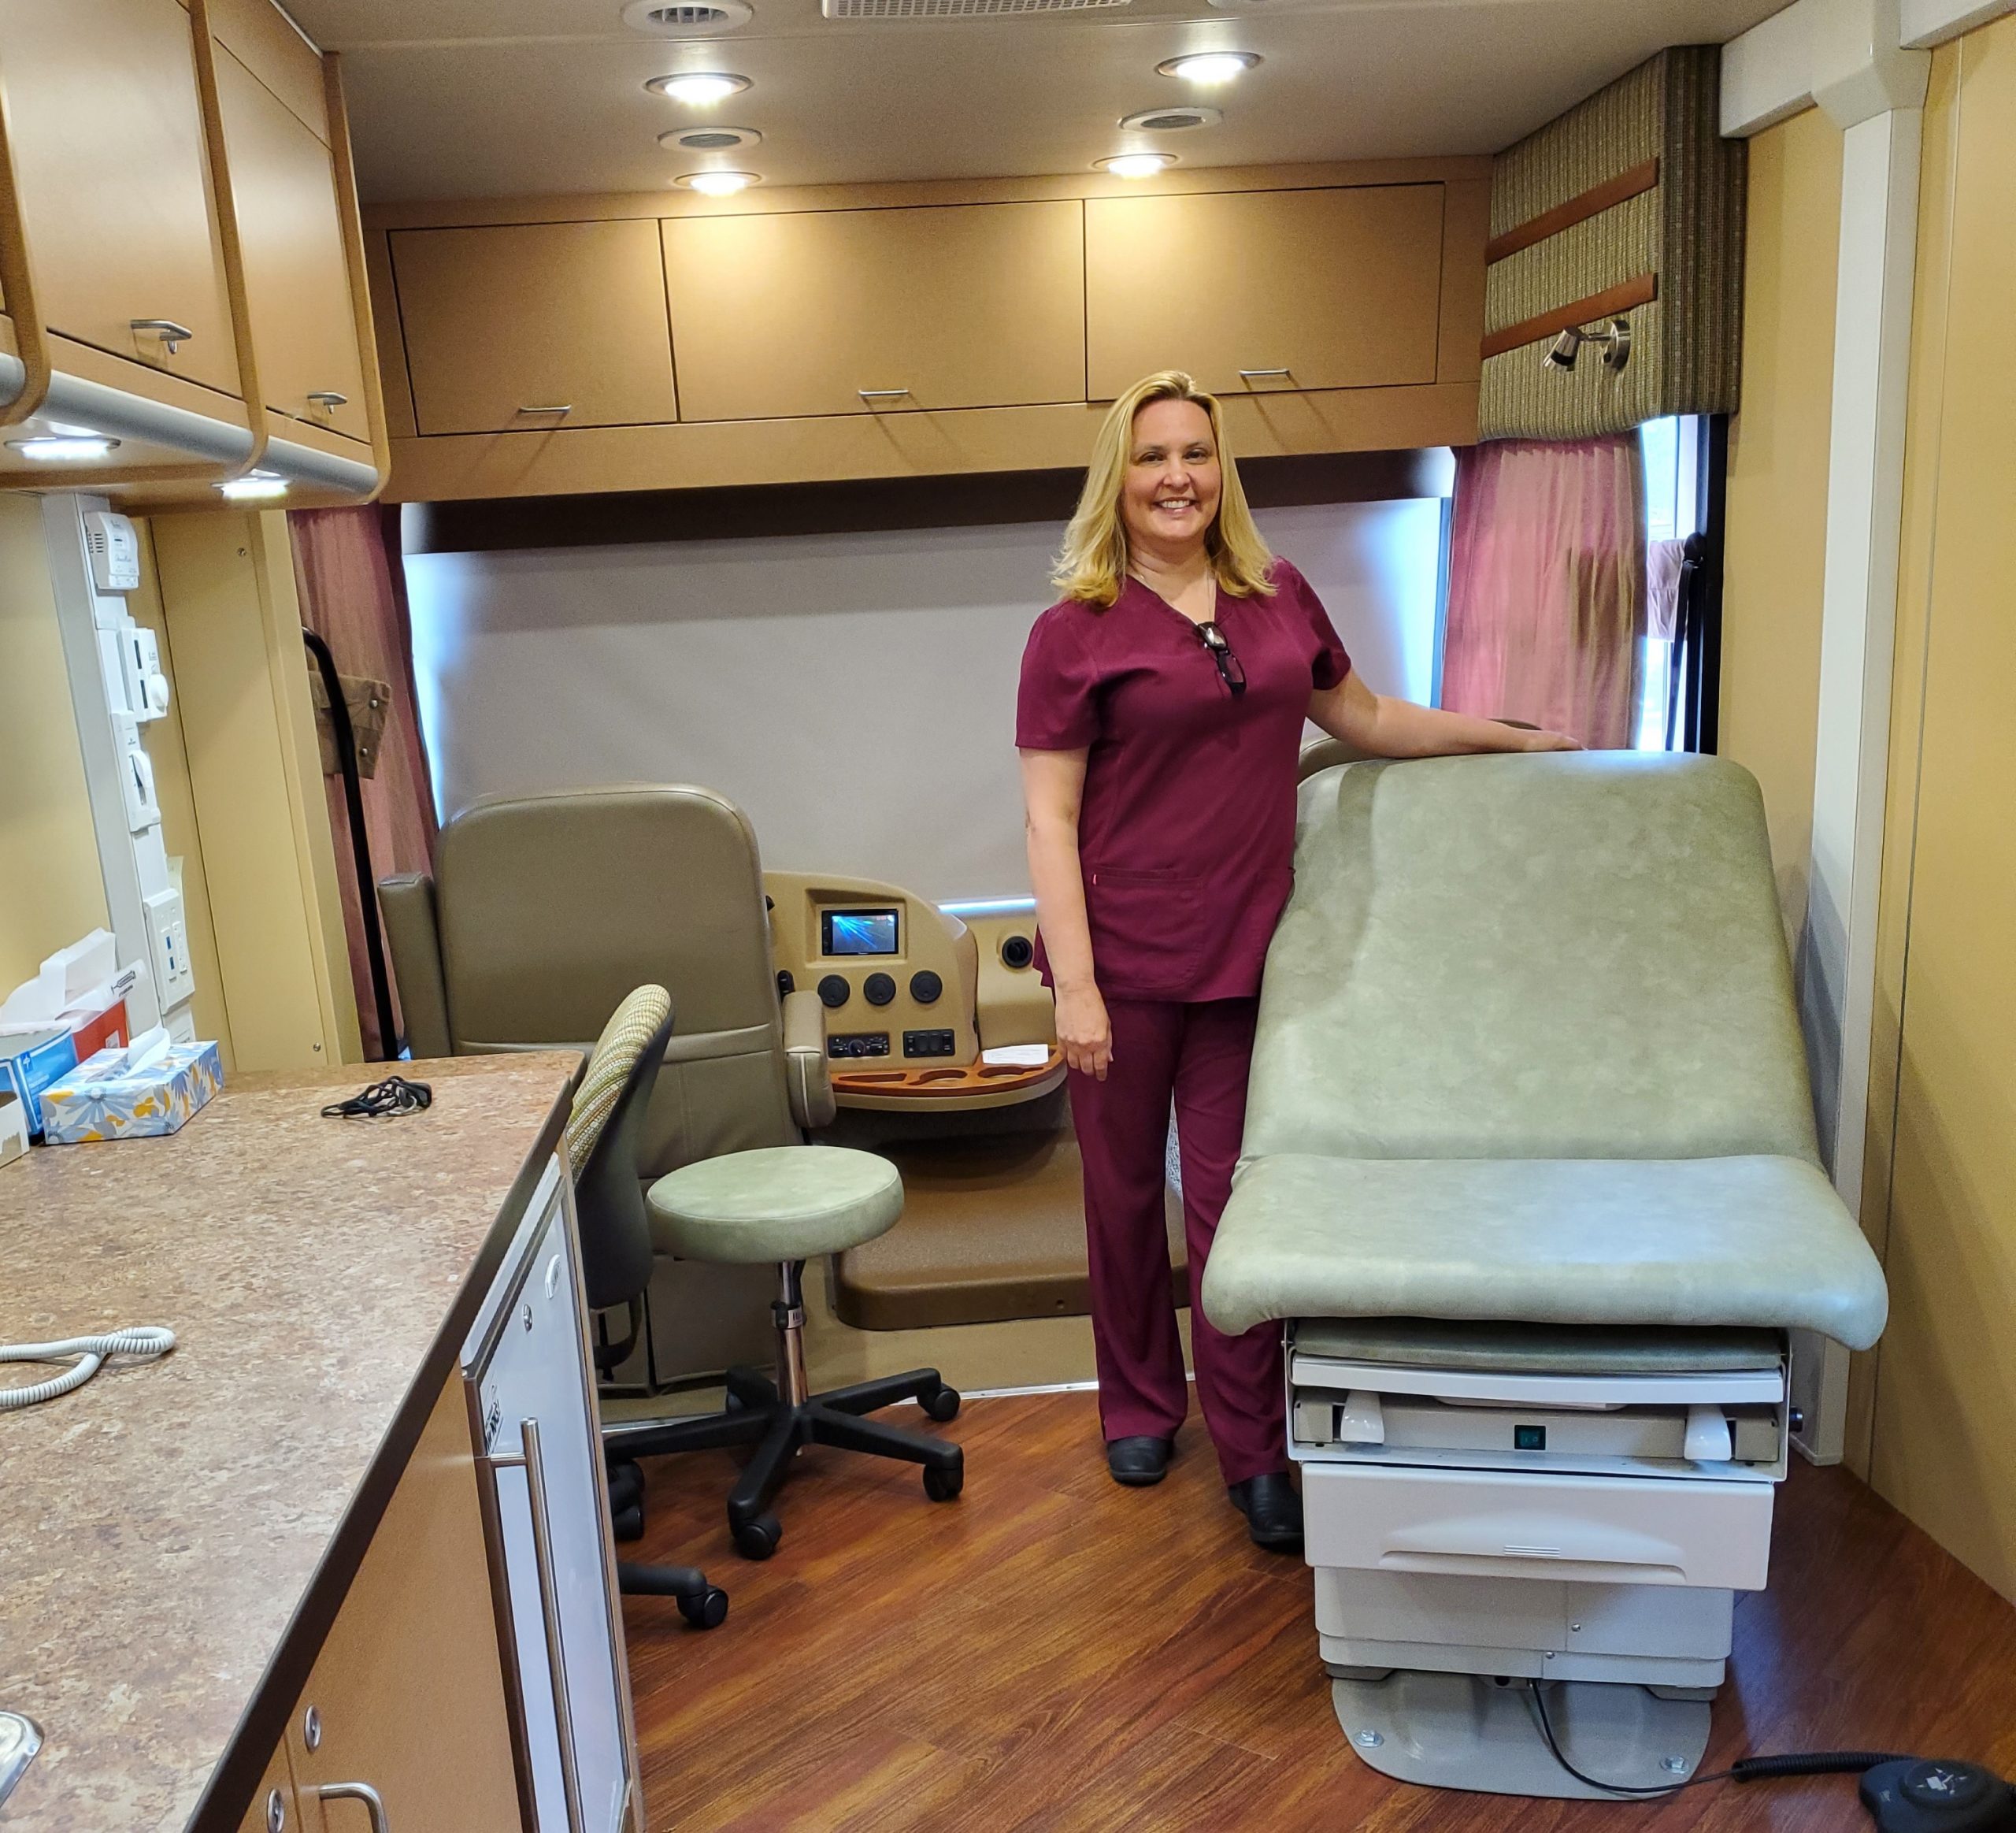 A woman in scrubs stands next to a medical bed in our mobile unit.